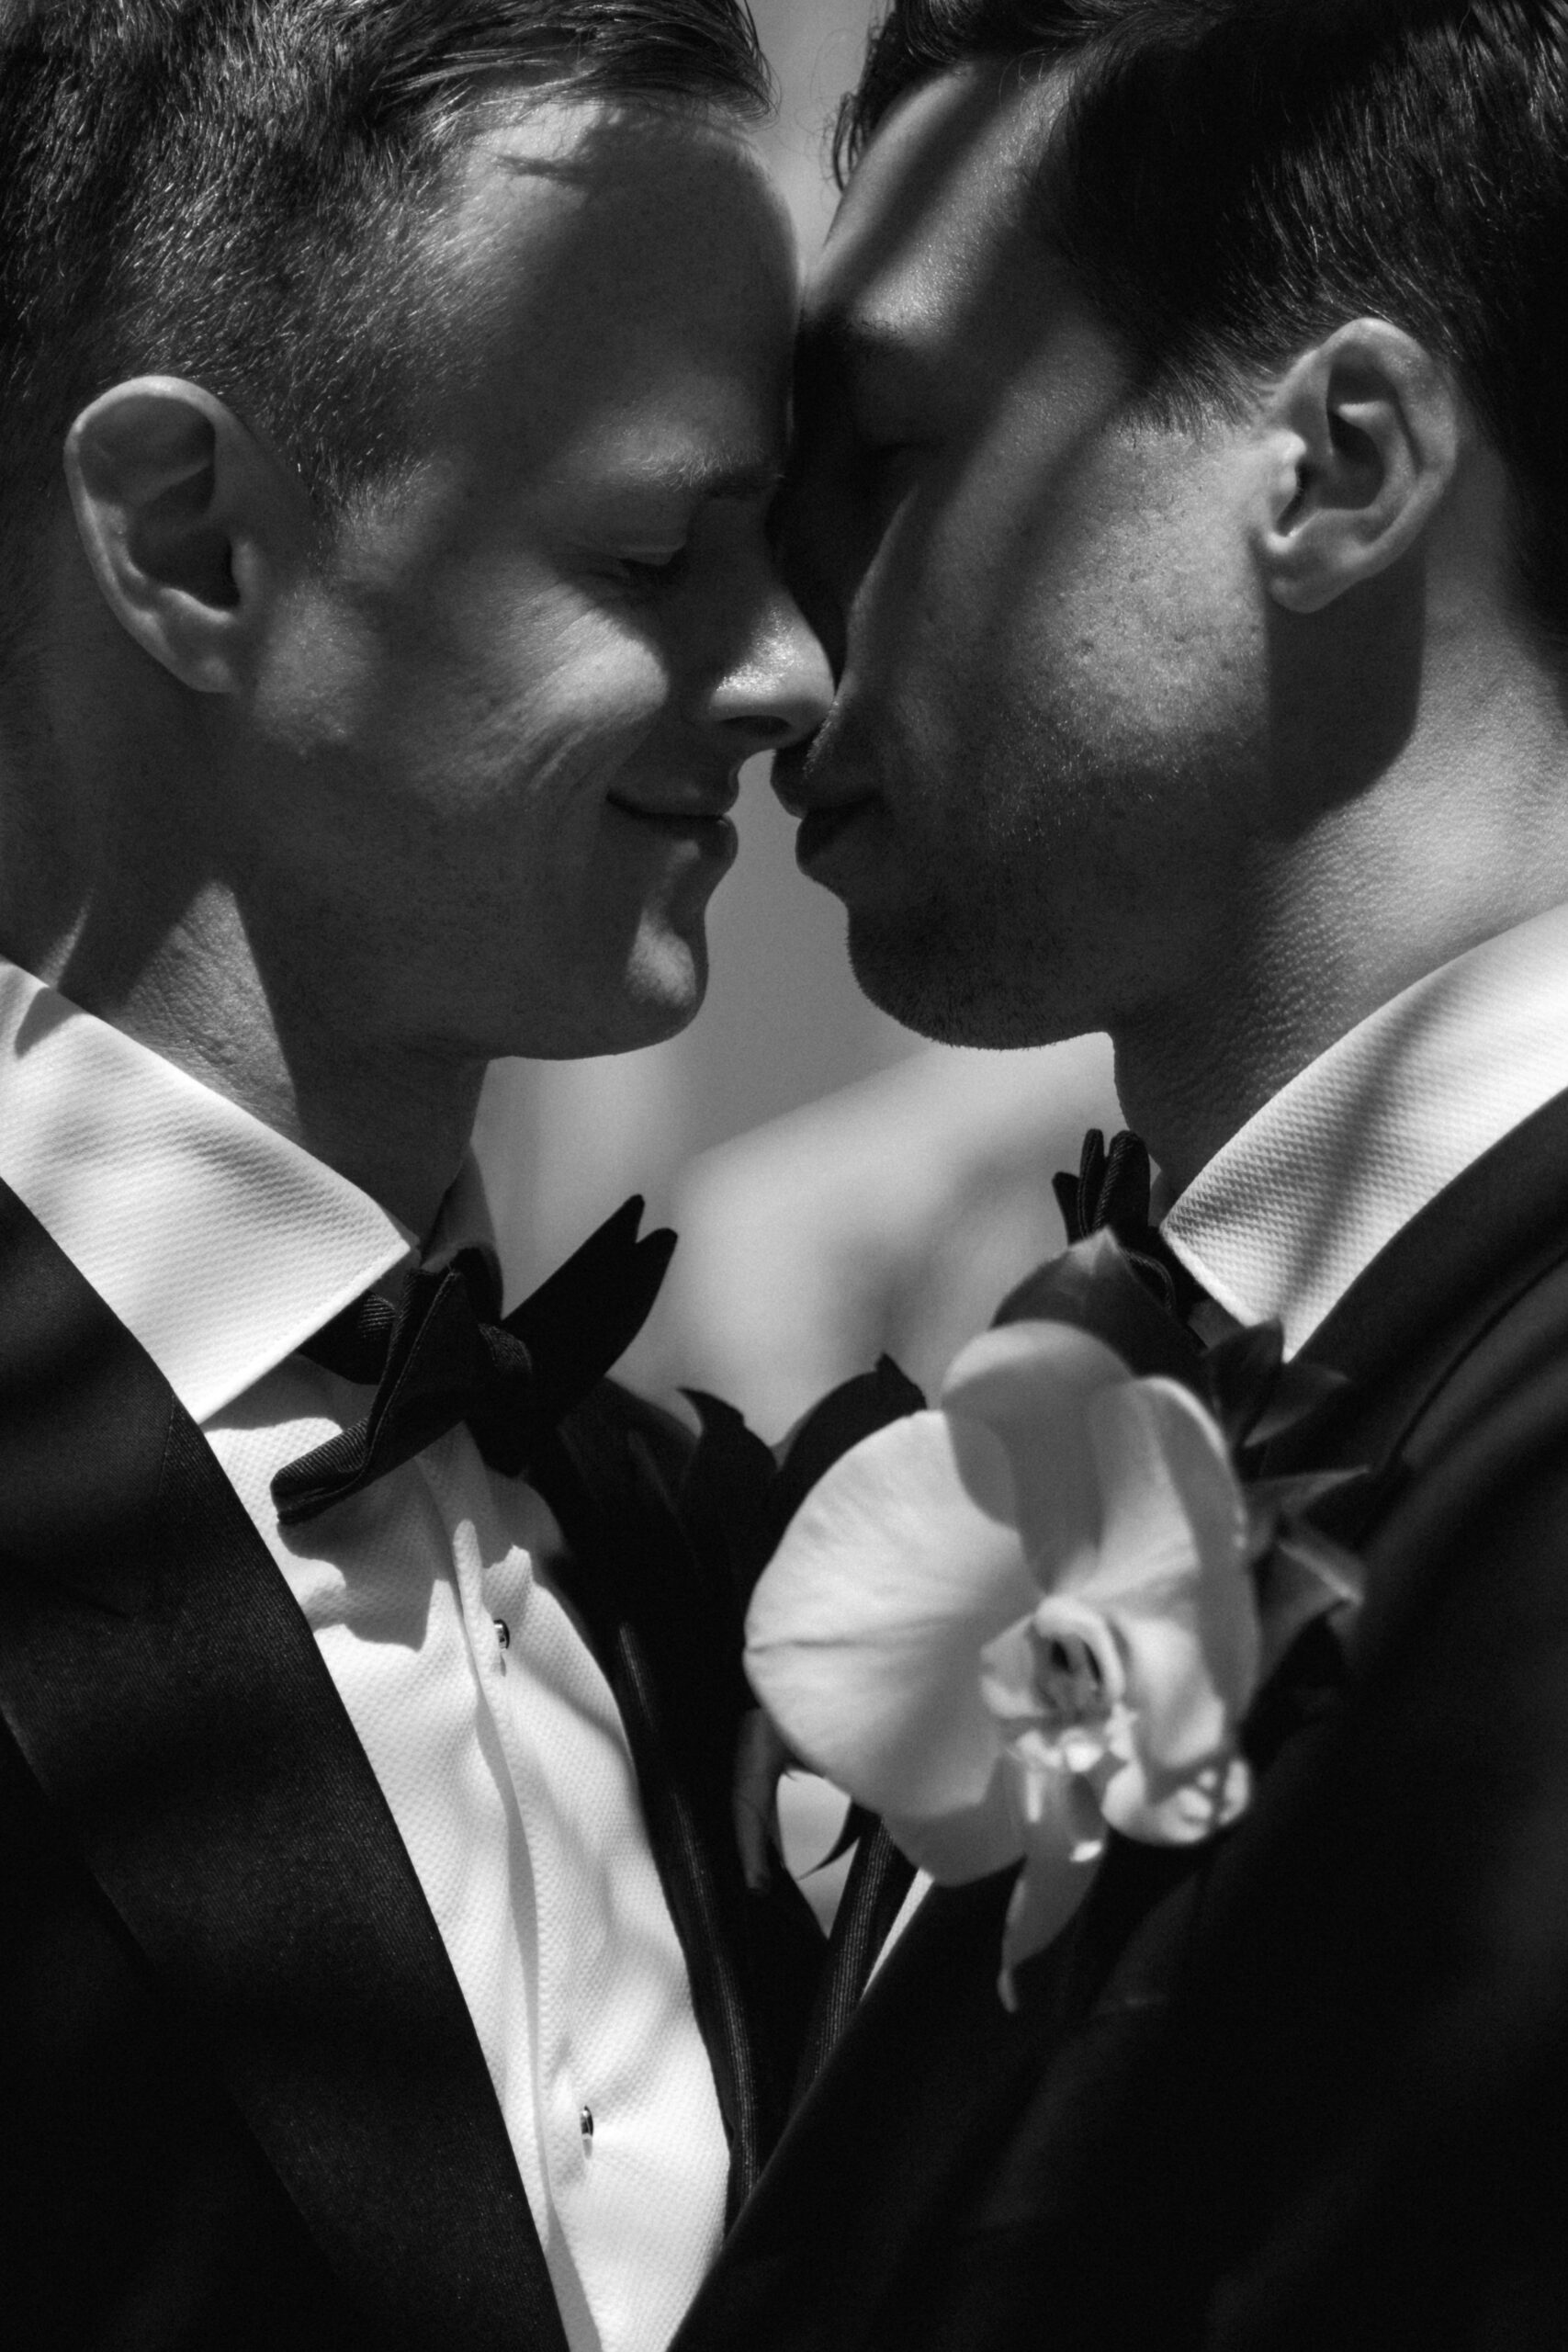 black and white closeup of gay couple embracing in formal tuxedos with palm tree shadows on their faces